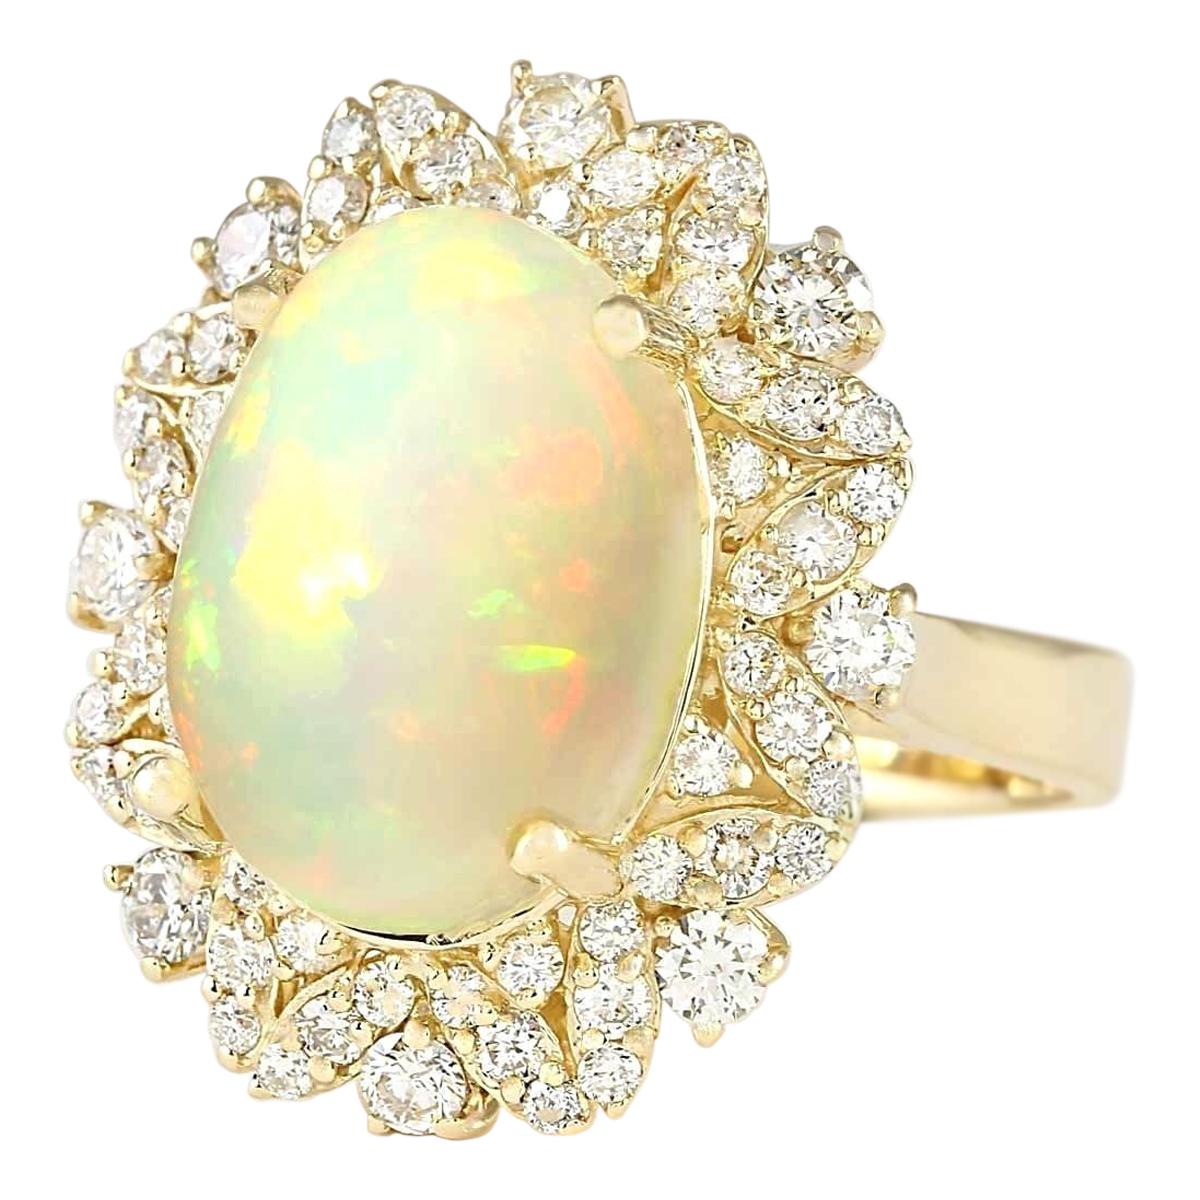 Stamped: 14K Yellow Gold
Total Ring Weight: 8.8 Grams
Total Natural Opal Weight is 6.48 Carat (Measures: 14.00x10.00 mm)
Color: Multicolor
Total Natural Diamond Weight is 1.20 Carat
Color: F-G, Clarity: VS2-SI1
Face Measures: 23.15x19.15 mm
Sku: